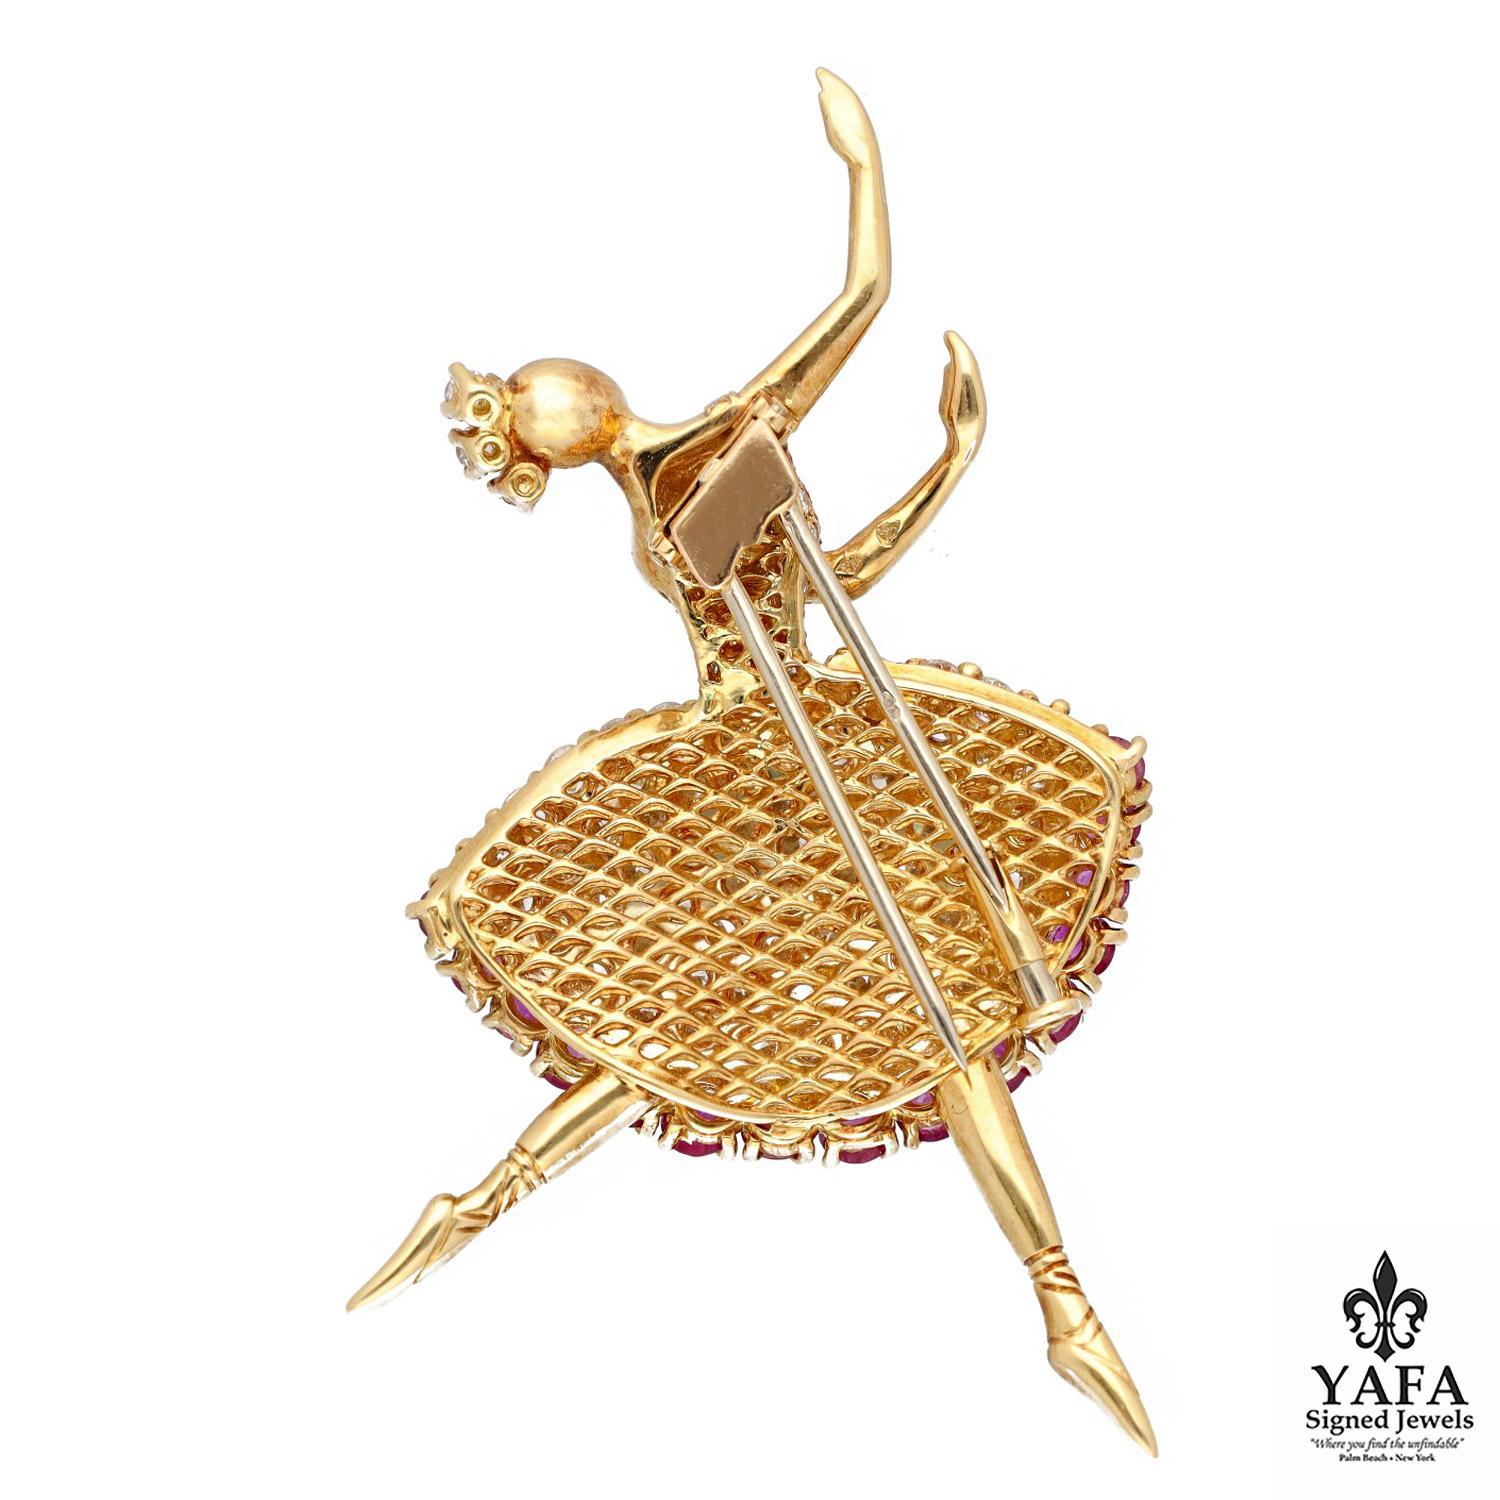 Van Cleef & Arpels 18K Yellow Gold, Diamond and Ruby Ballerina Brooch. Louis Arpels so inspired by his love for classical ballets at the Opera Garnier in Paris is said to have conceived the idea of this now iconic Ballerina collection.
Total Diamond